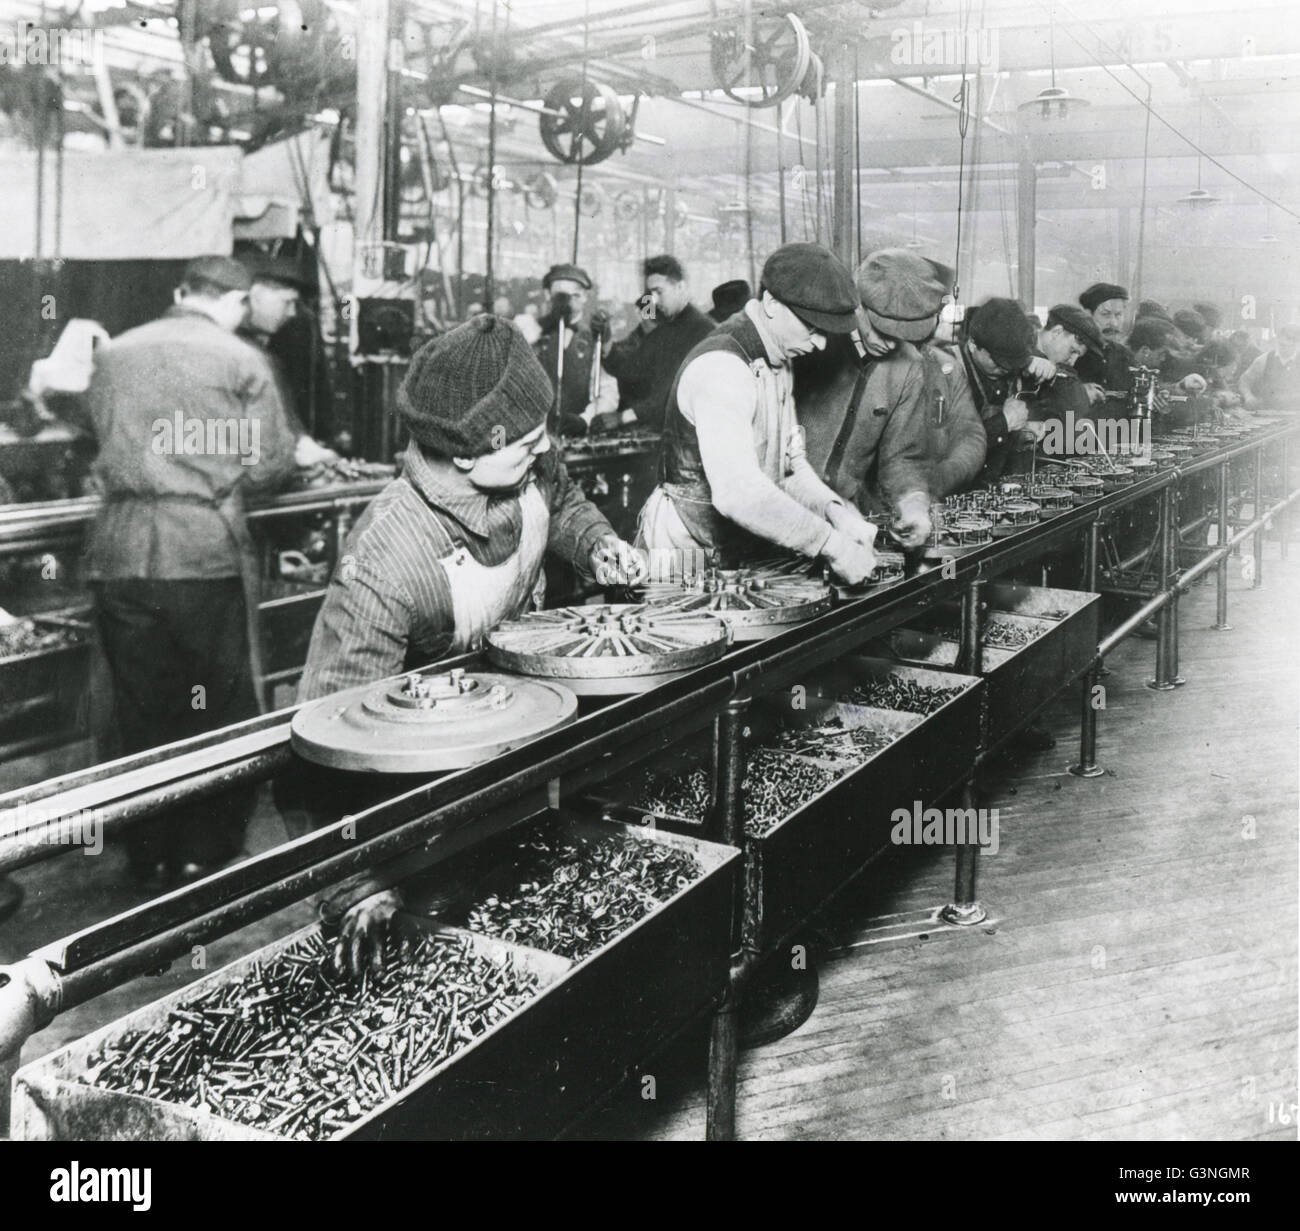 These workers in 1913 at the Ford Motor Company plant made industrial history by building a flywheel magneto on a moving assembly line. Here they are on the assembly line. Stock Photo